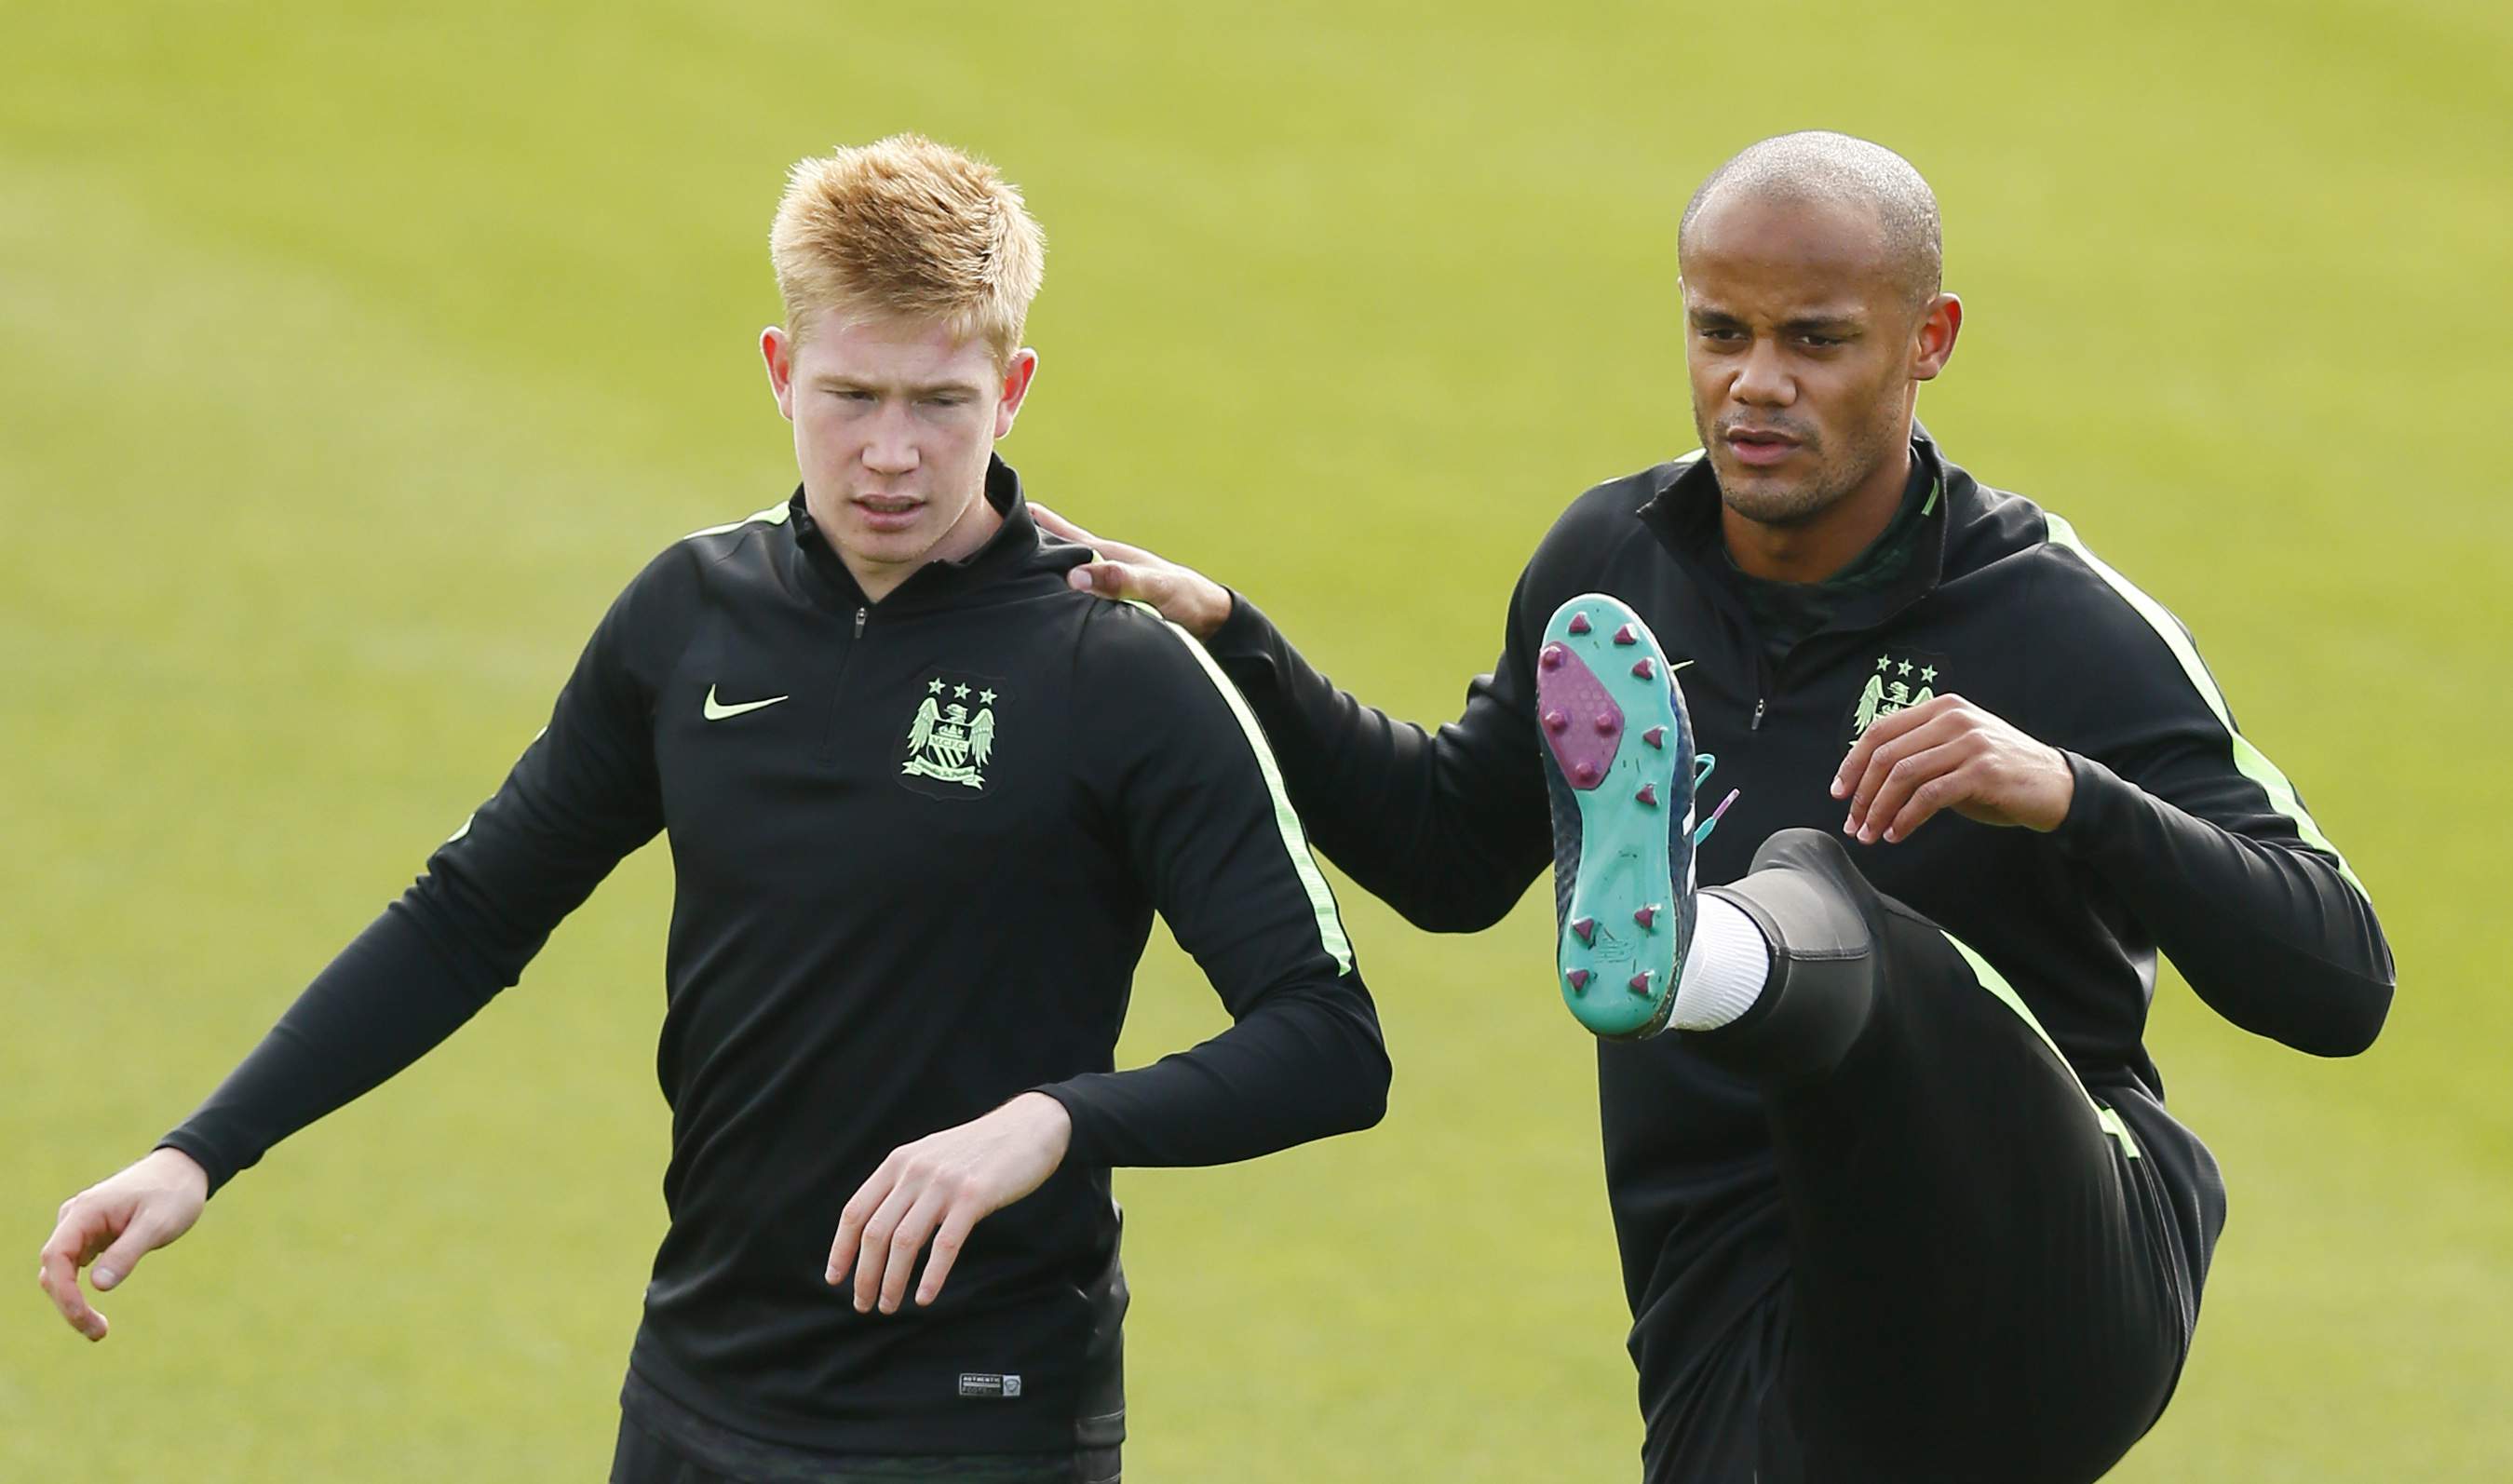 Football - Manchester City Training - City Football Academy - 20/10/15 Manchester City's Kevin De Bruyne and Vincent Kompany during training Action Images via Reuters / Jason Cairnduff Livepic